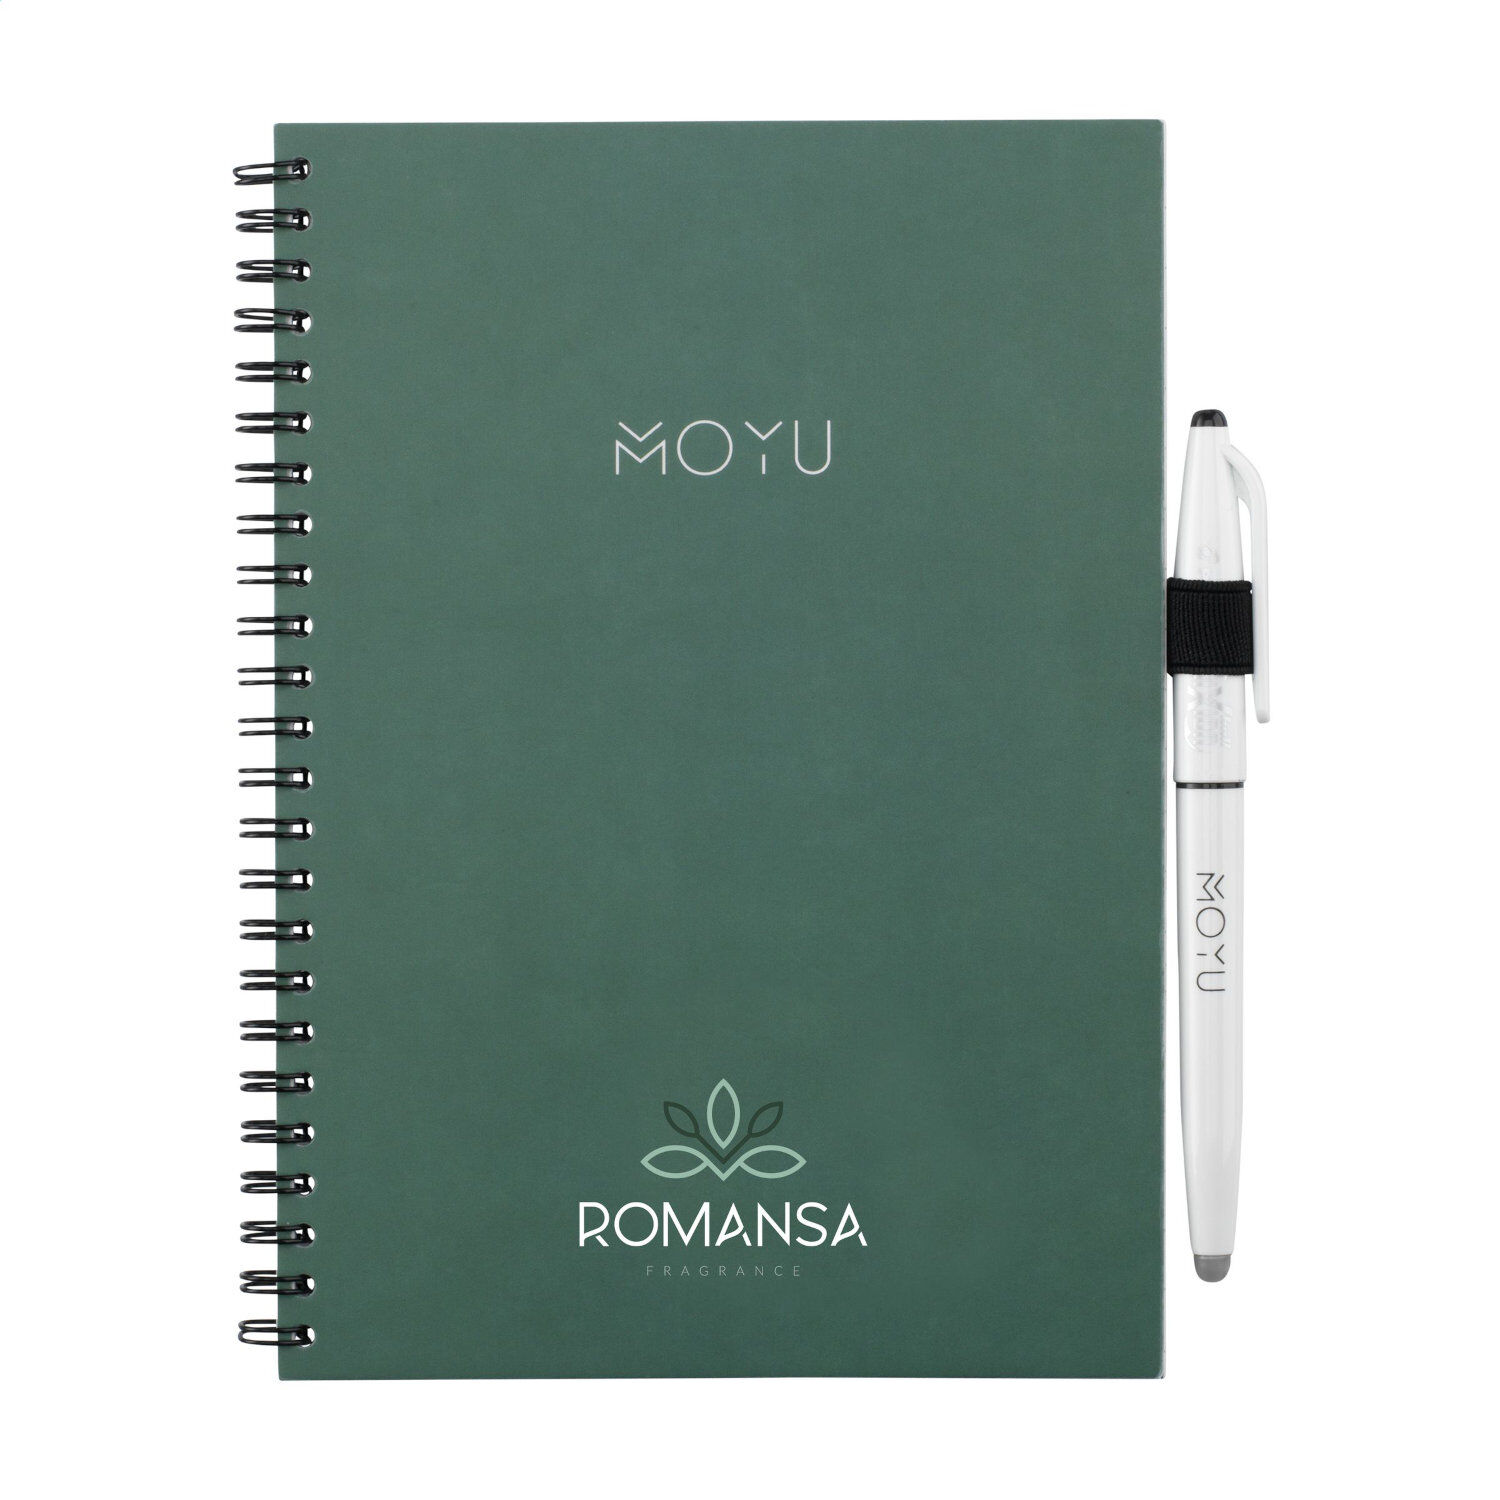 Stone Paper Notebook (green with sample branding)